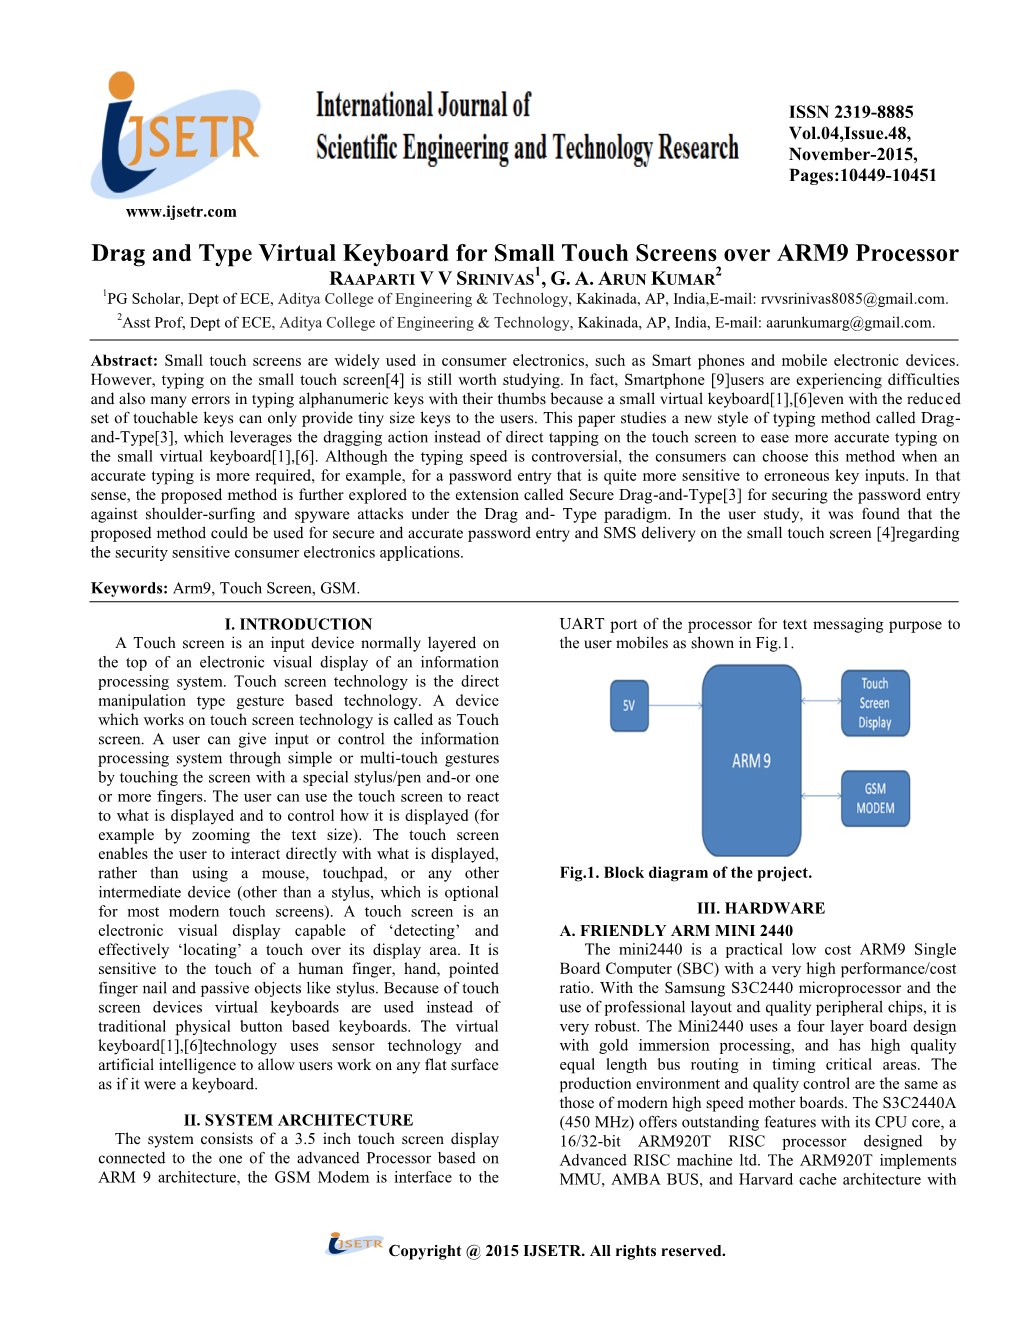 Drag and Type Virtual Keyboard for Small Touch Screens Over ARM9 Processor 1 2 RAAPARTI V V SRINIVAS , G